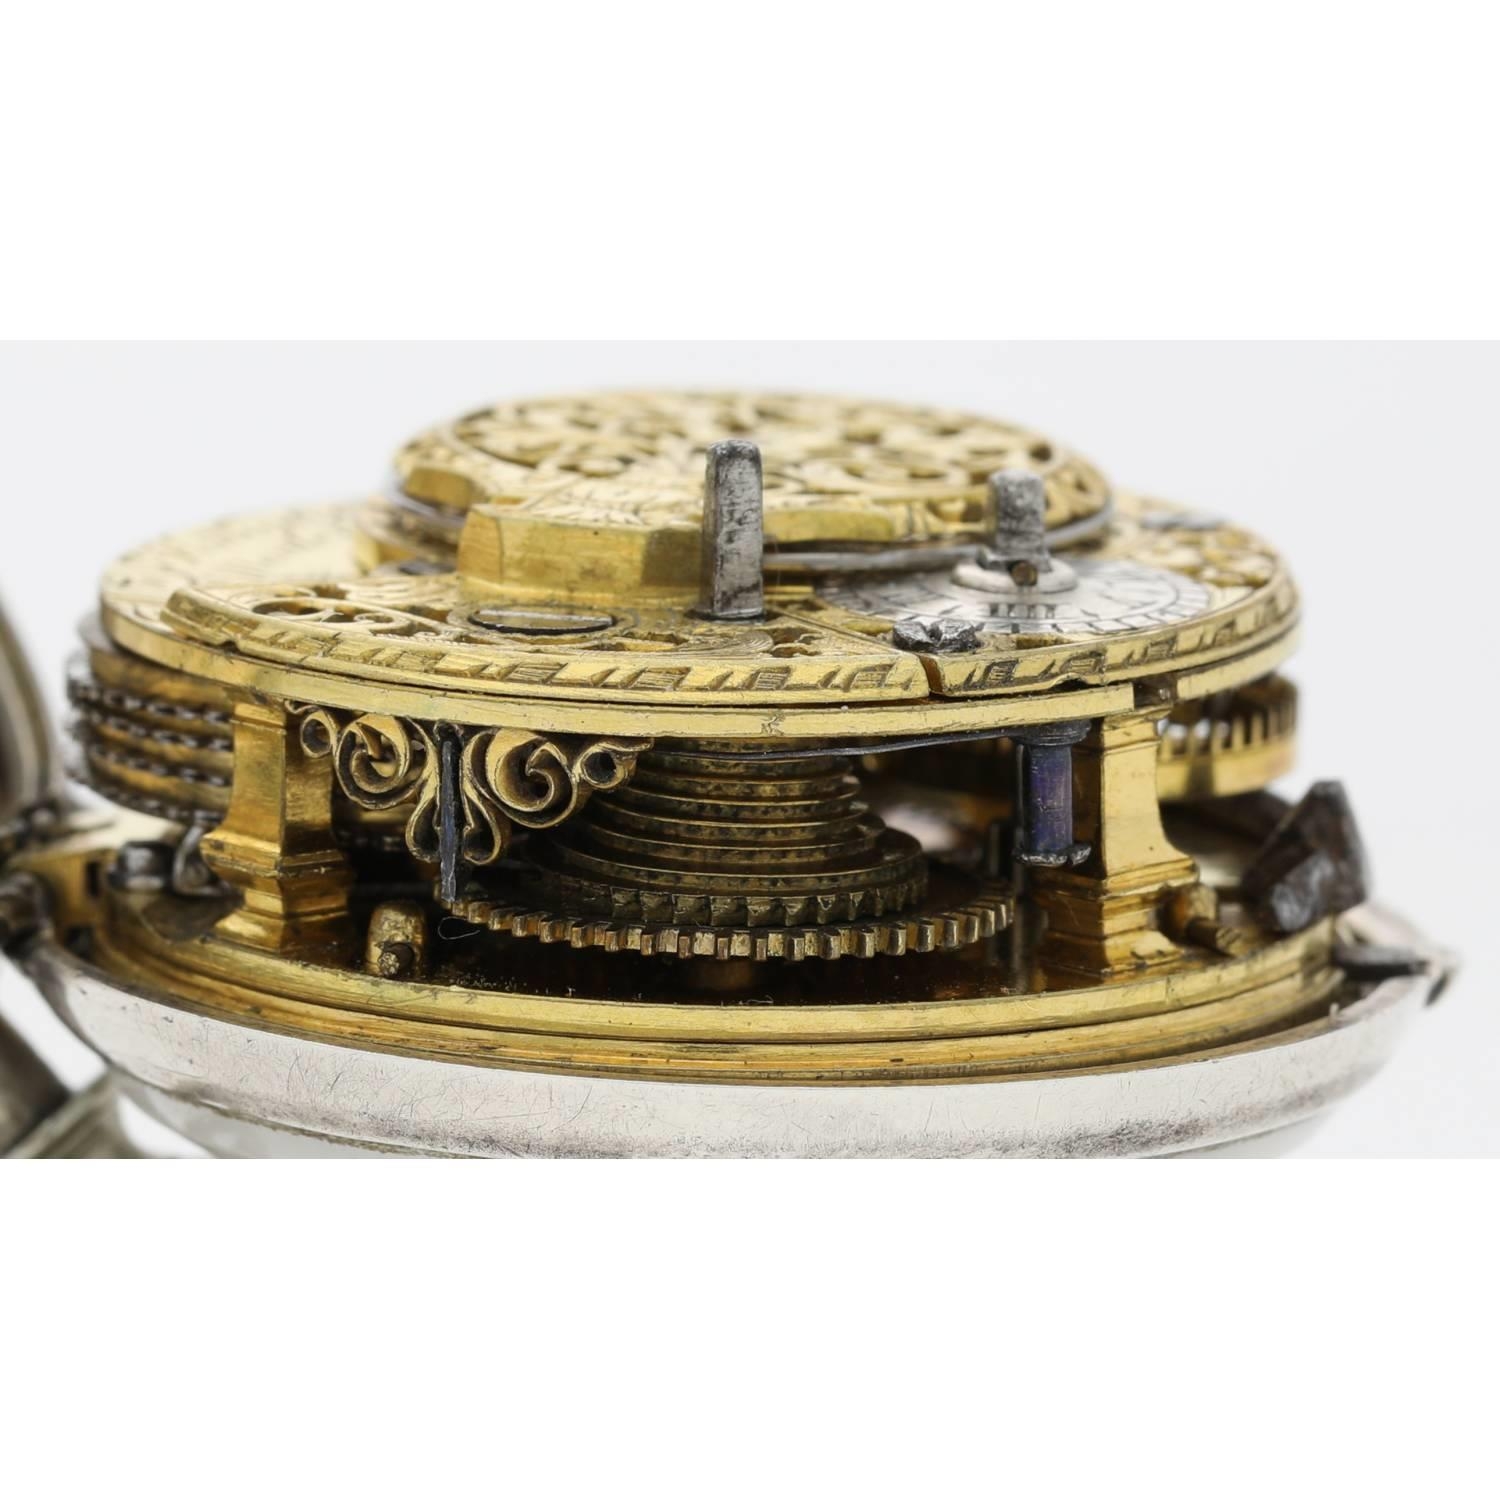 William Knight, West Marden - mid-18th century English silver pair cased verge pocket watch, - Image 5 of 10